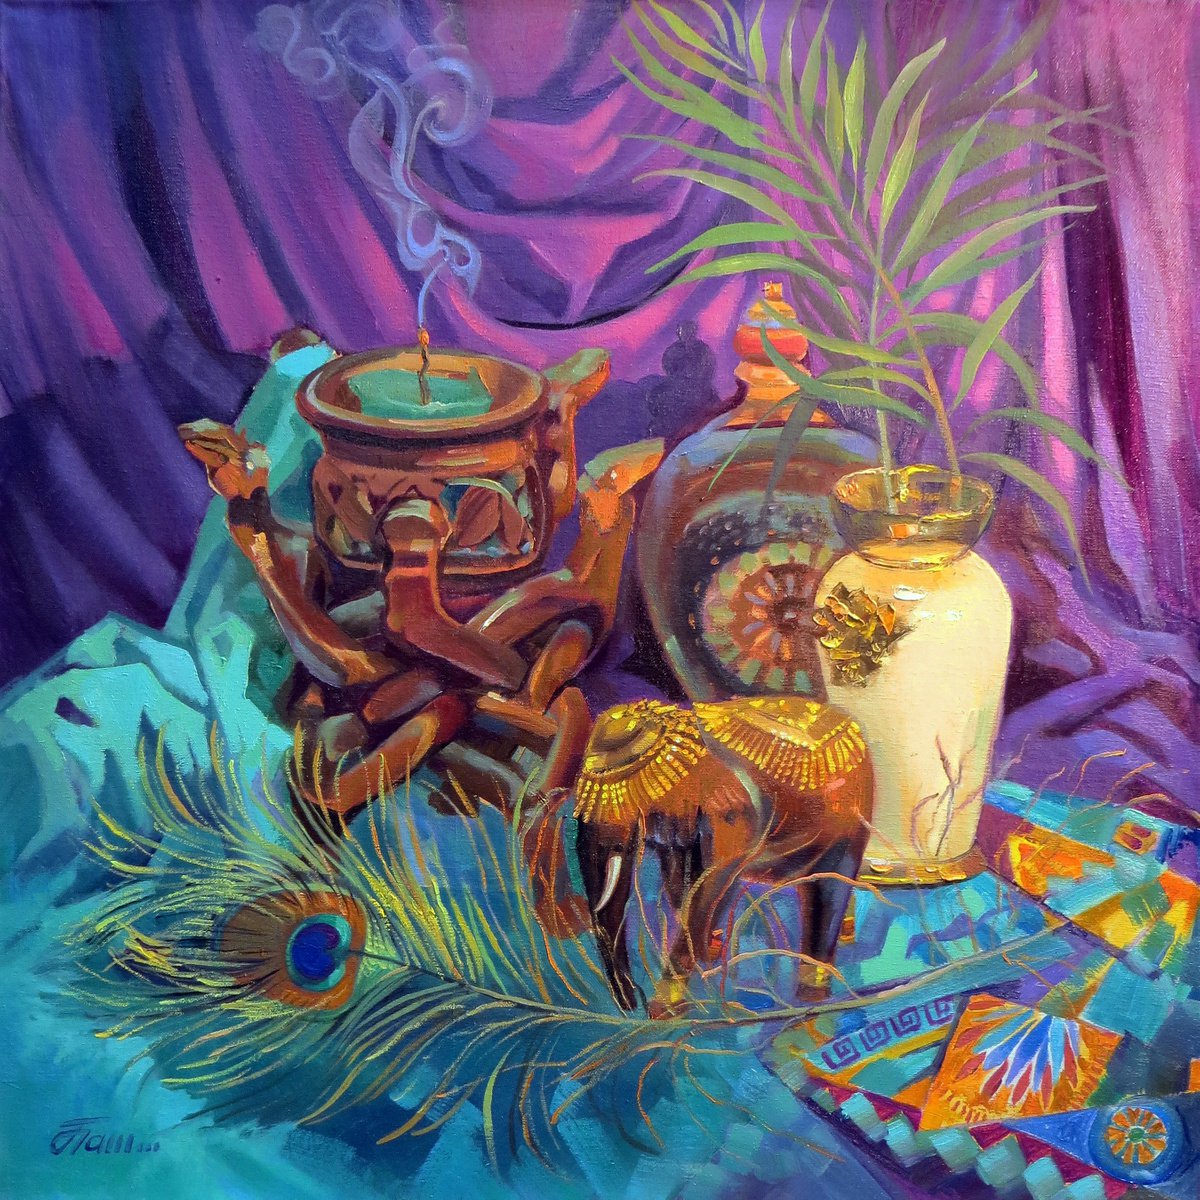 FROM FAR TRAVELS, 60x60, oil on canvas by Olga Panina